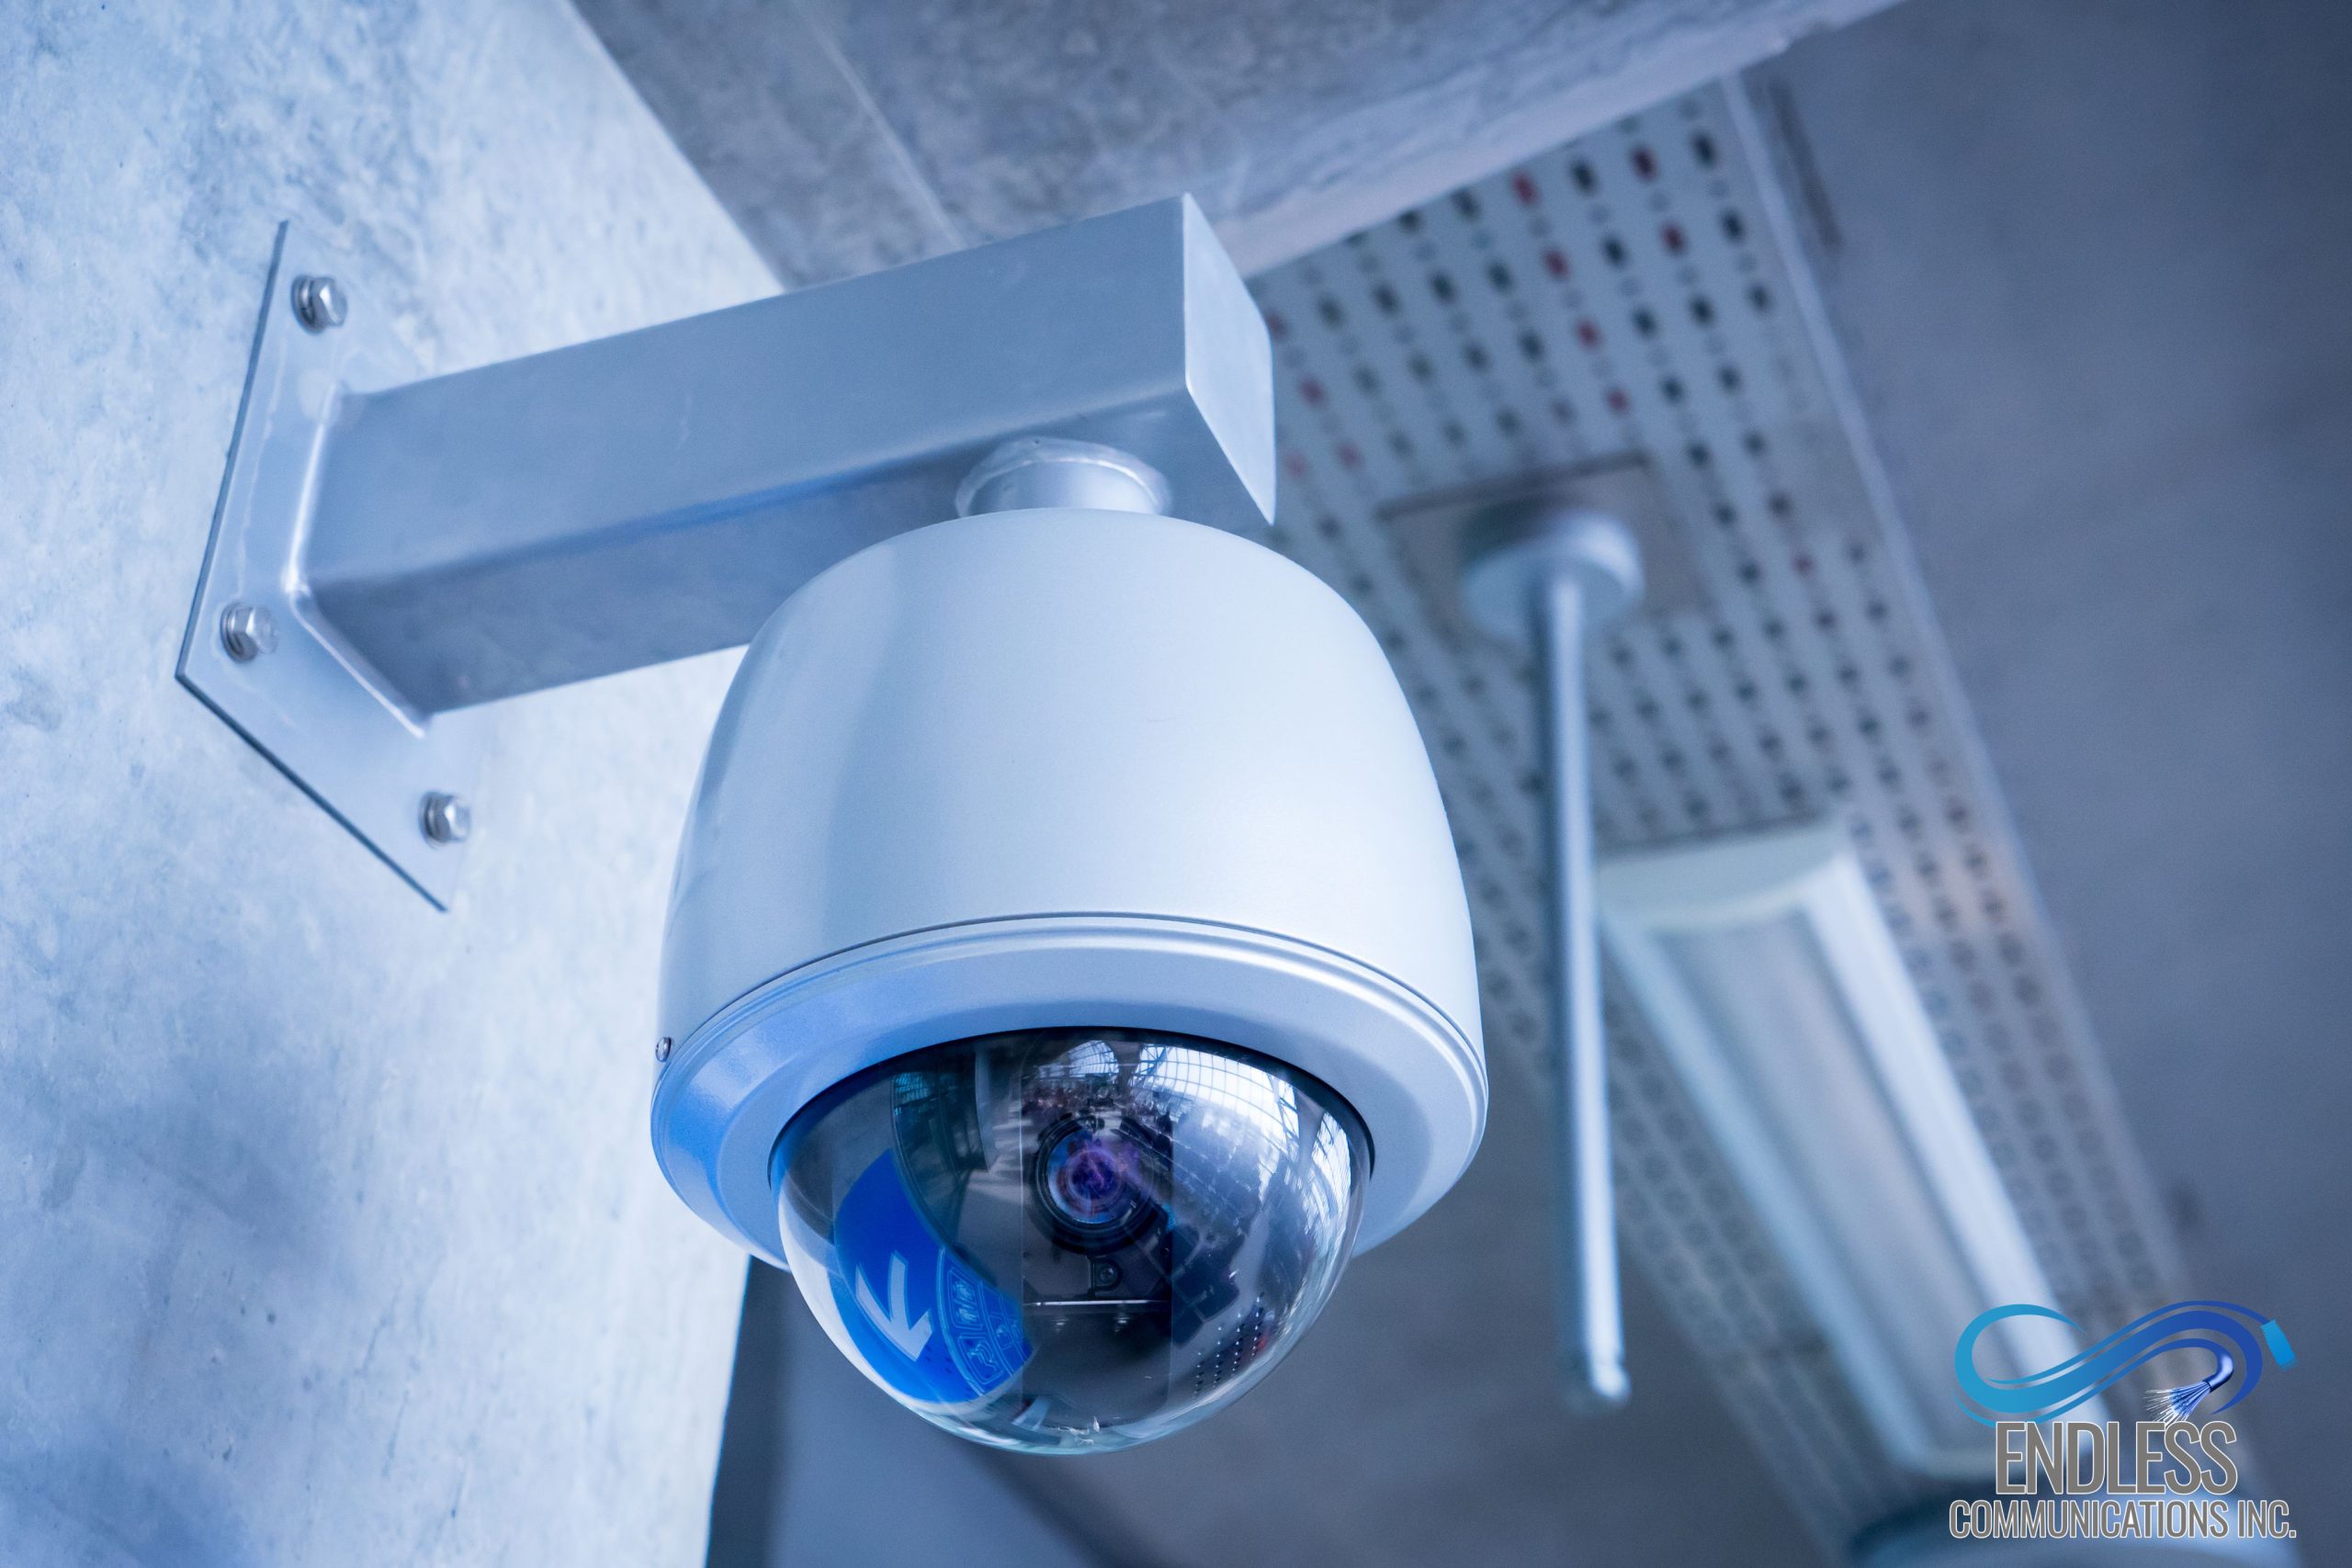 Are You Looking for Commercial and Industrial Security Camera Systems in Cabazon?